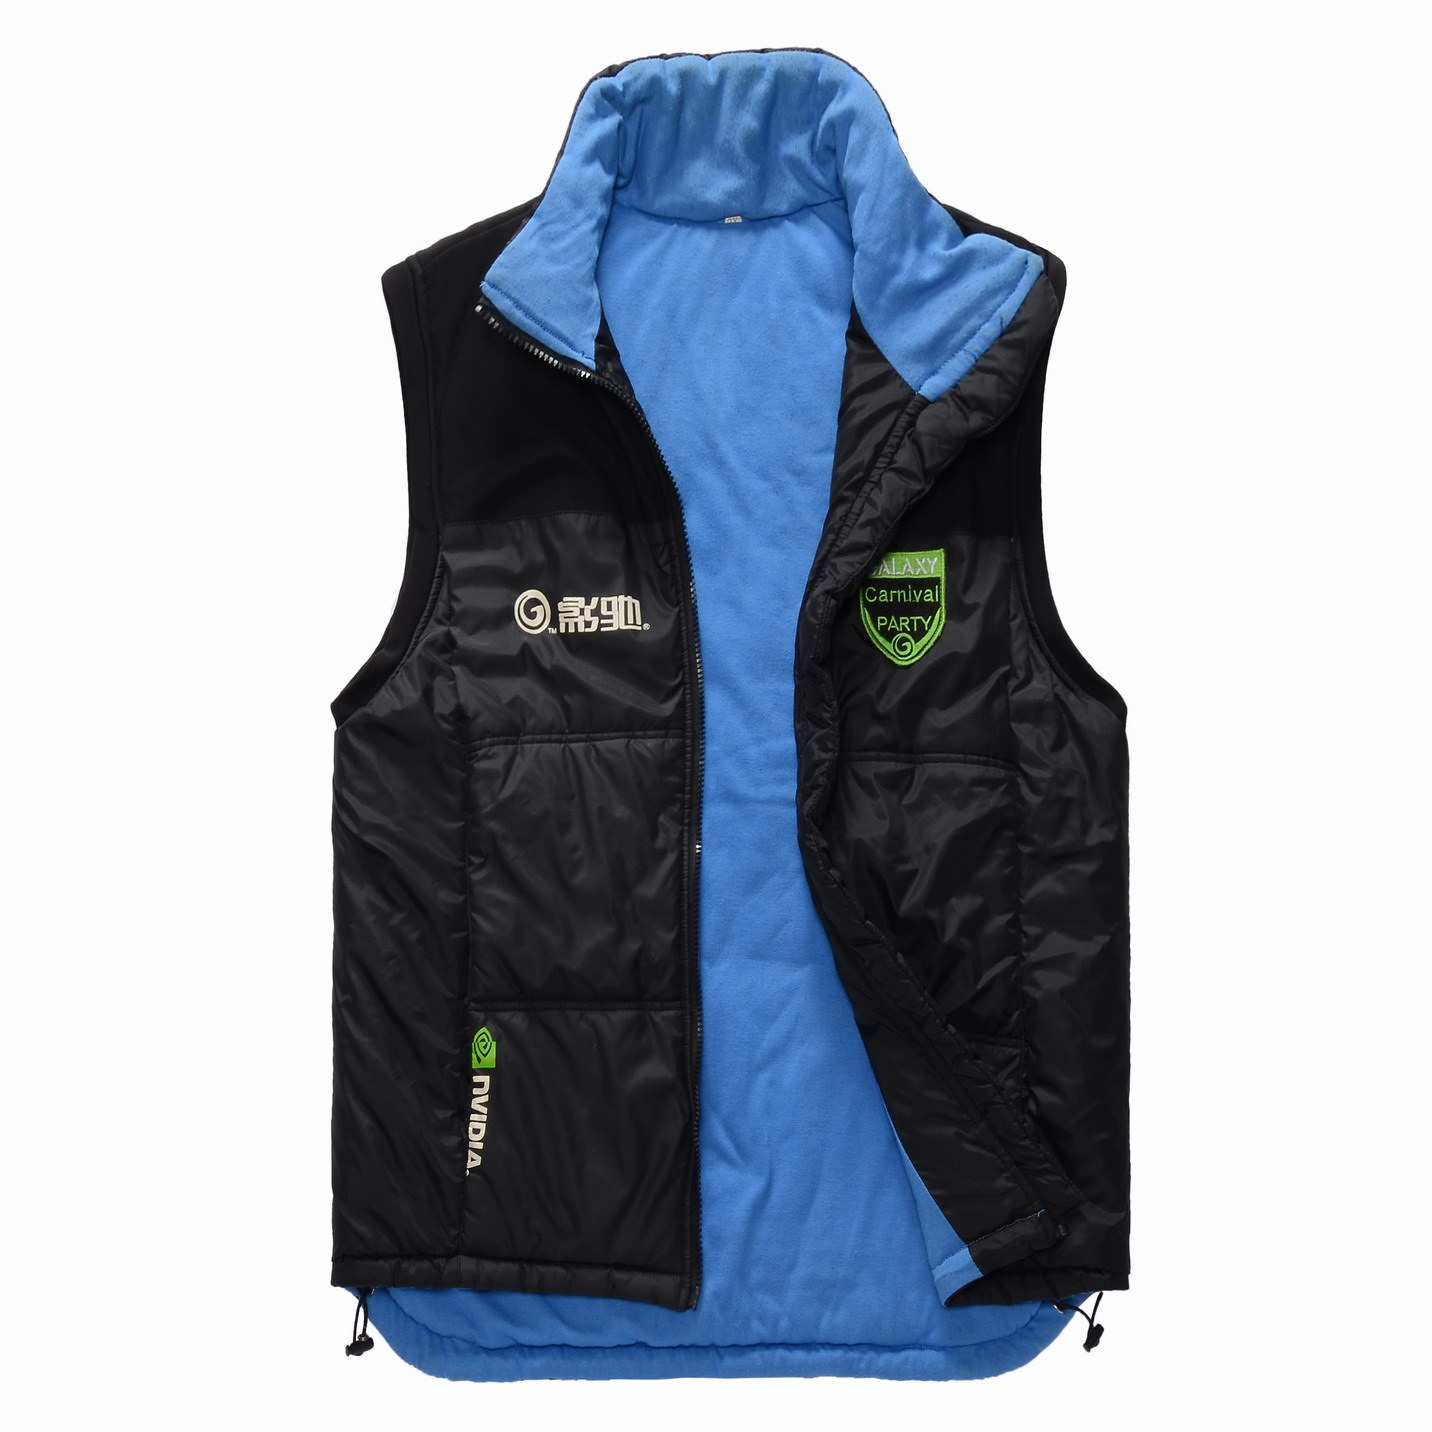 Winter Vest for Carnival Party with Galaxy Logo